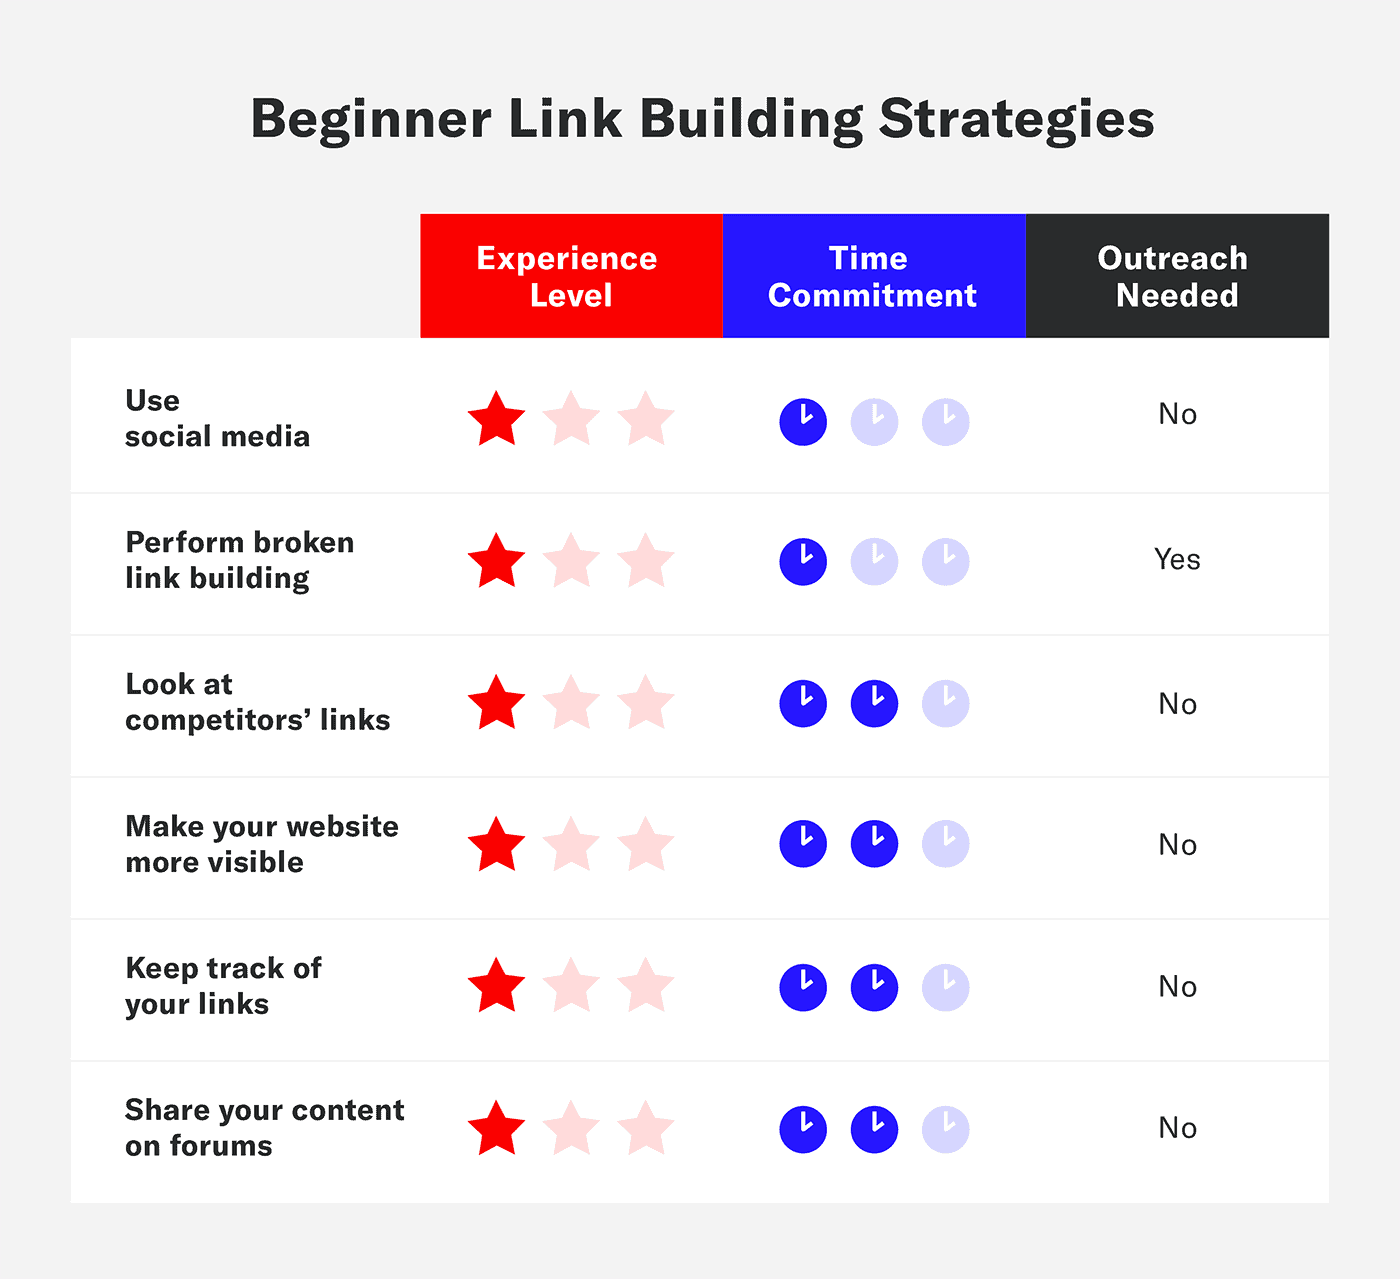 A graphic shows what are some of the beginner link building strategies